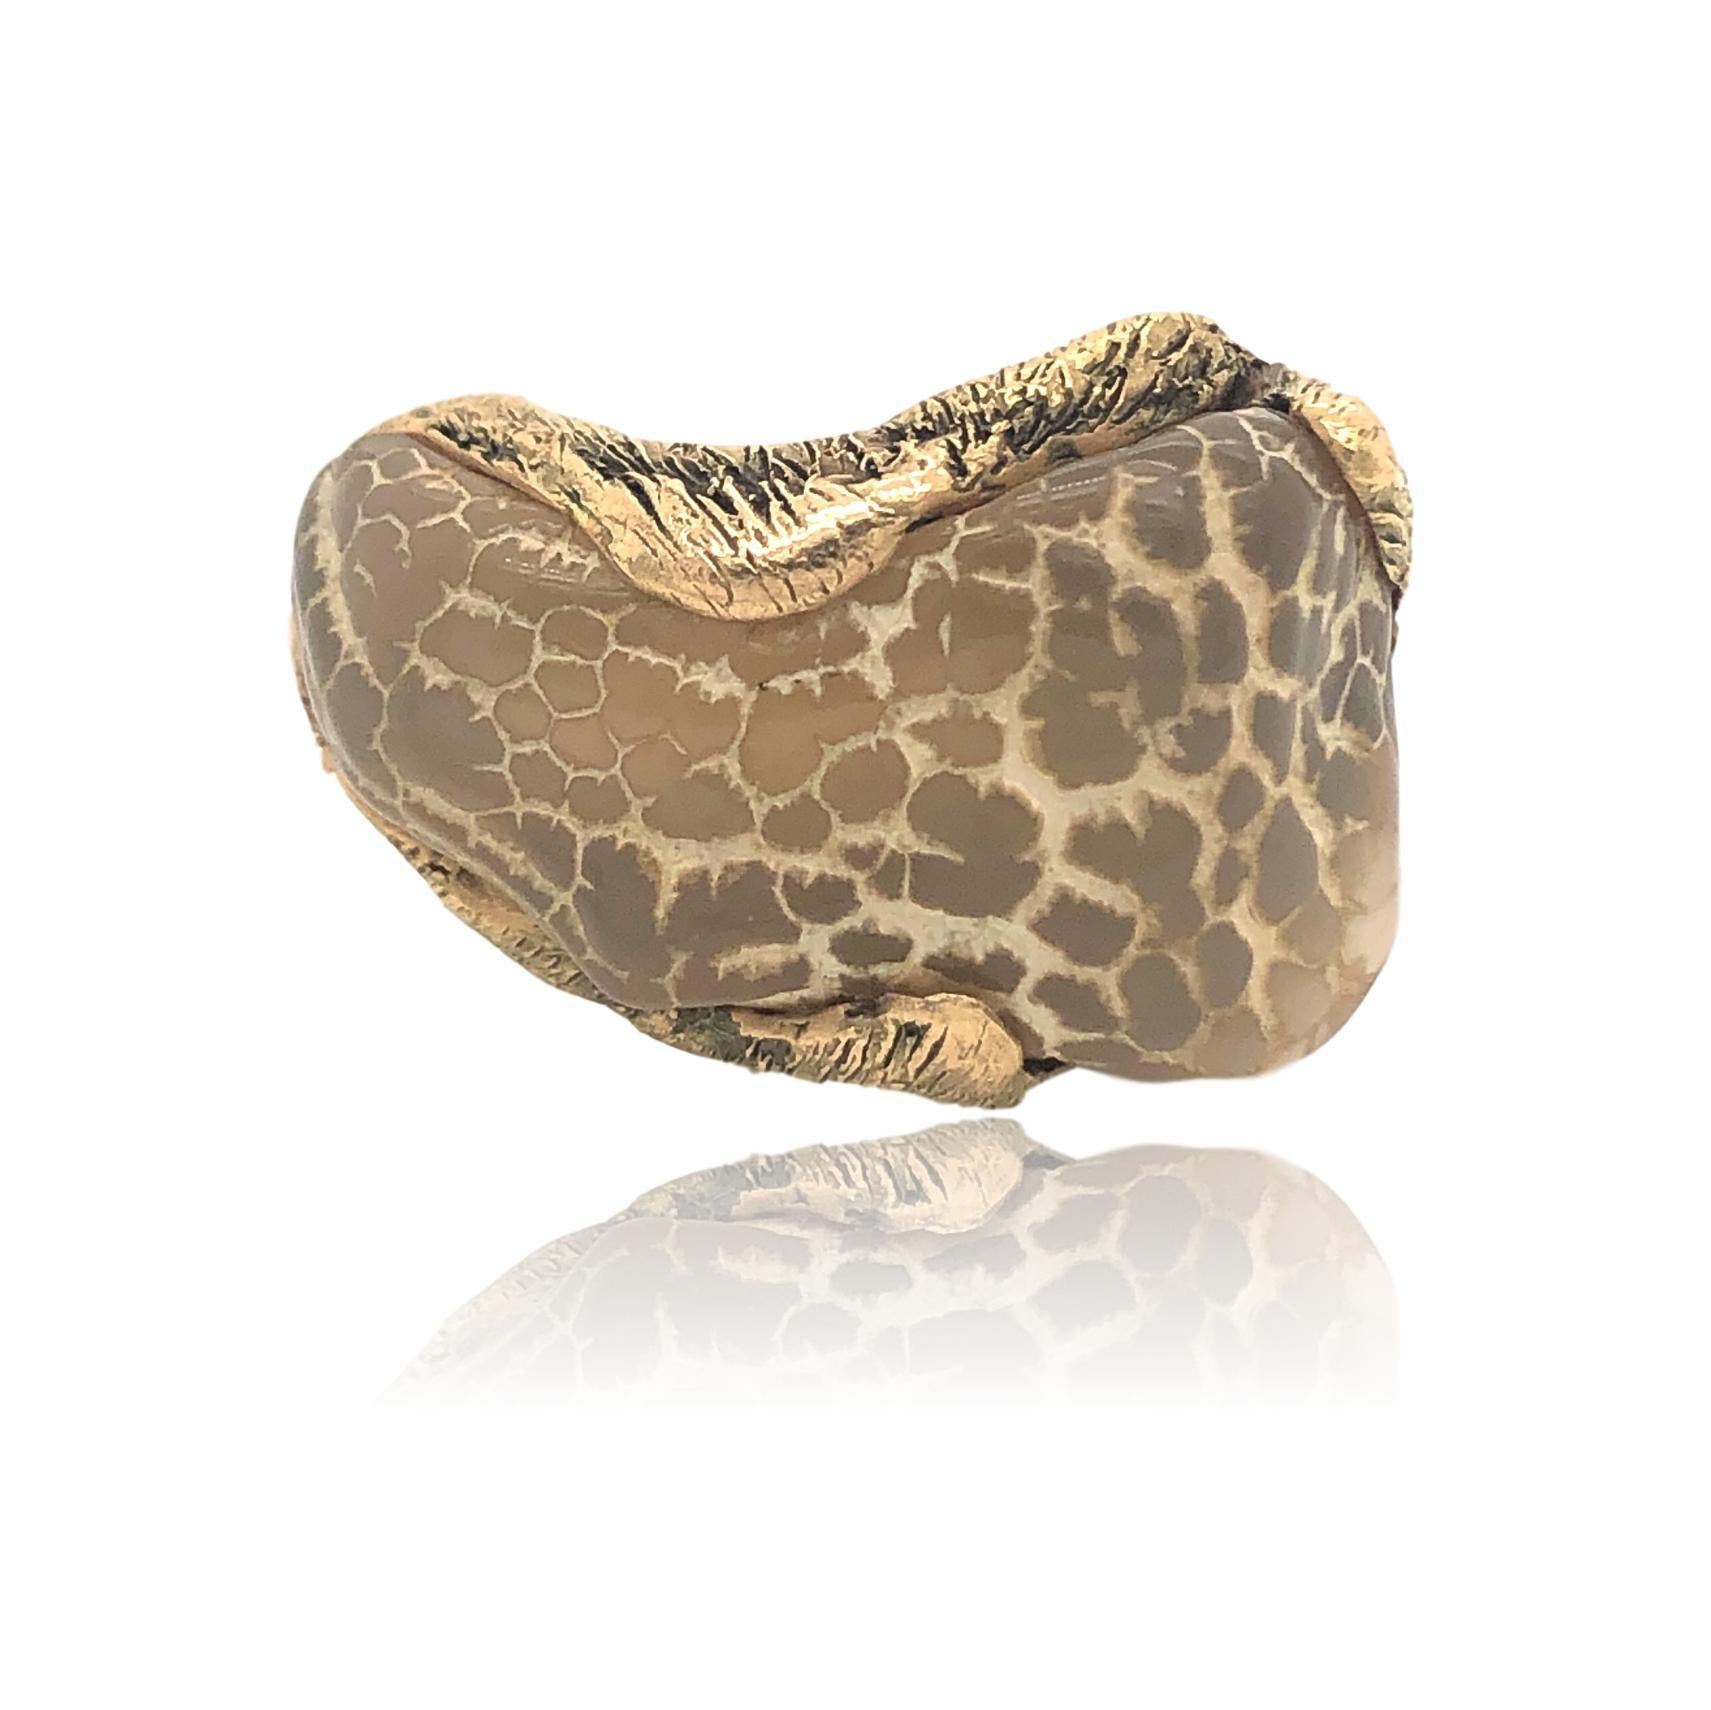 Modernist 1970s Snakeskin Agate and Gold Ring